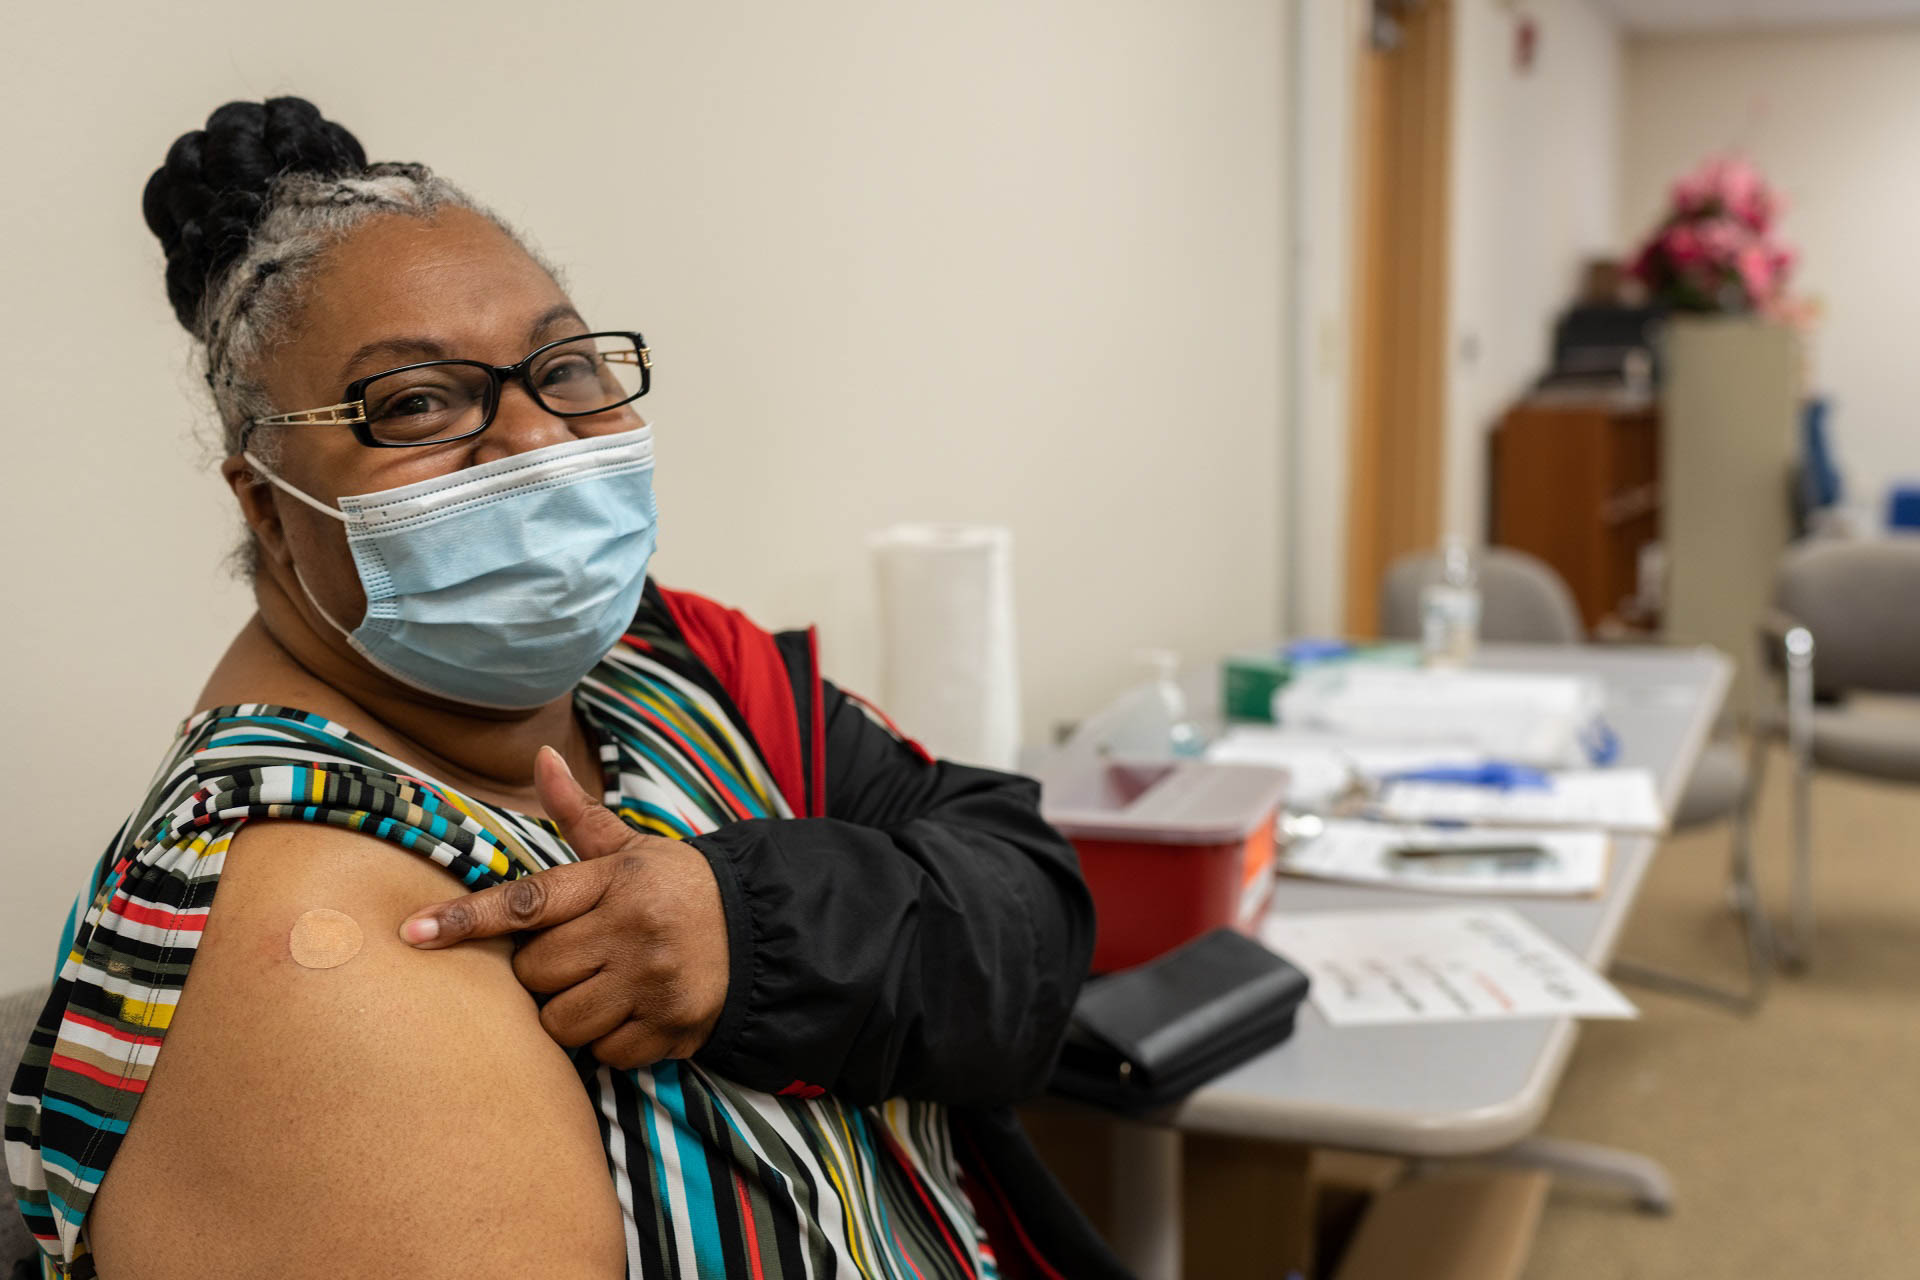 Vera Montgomery was one of several hundred people who received a COVID-19 vaccination at the Mt. Moriah Missionary Baptist Church in Gainesville last Friday. The event was a collaboration between UF Health and the state Department of Health in Alachua County.